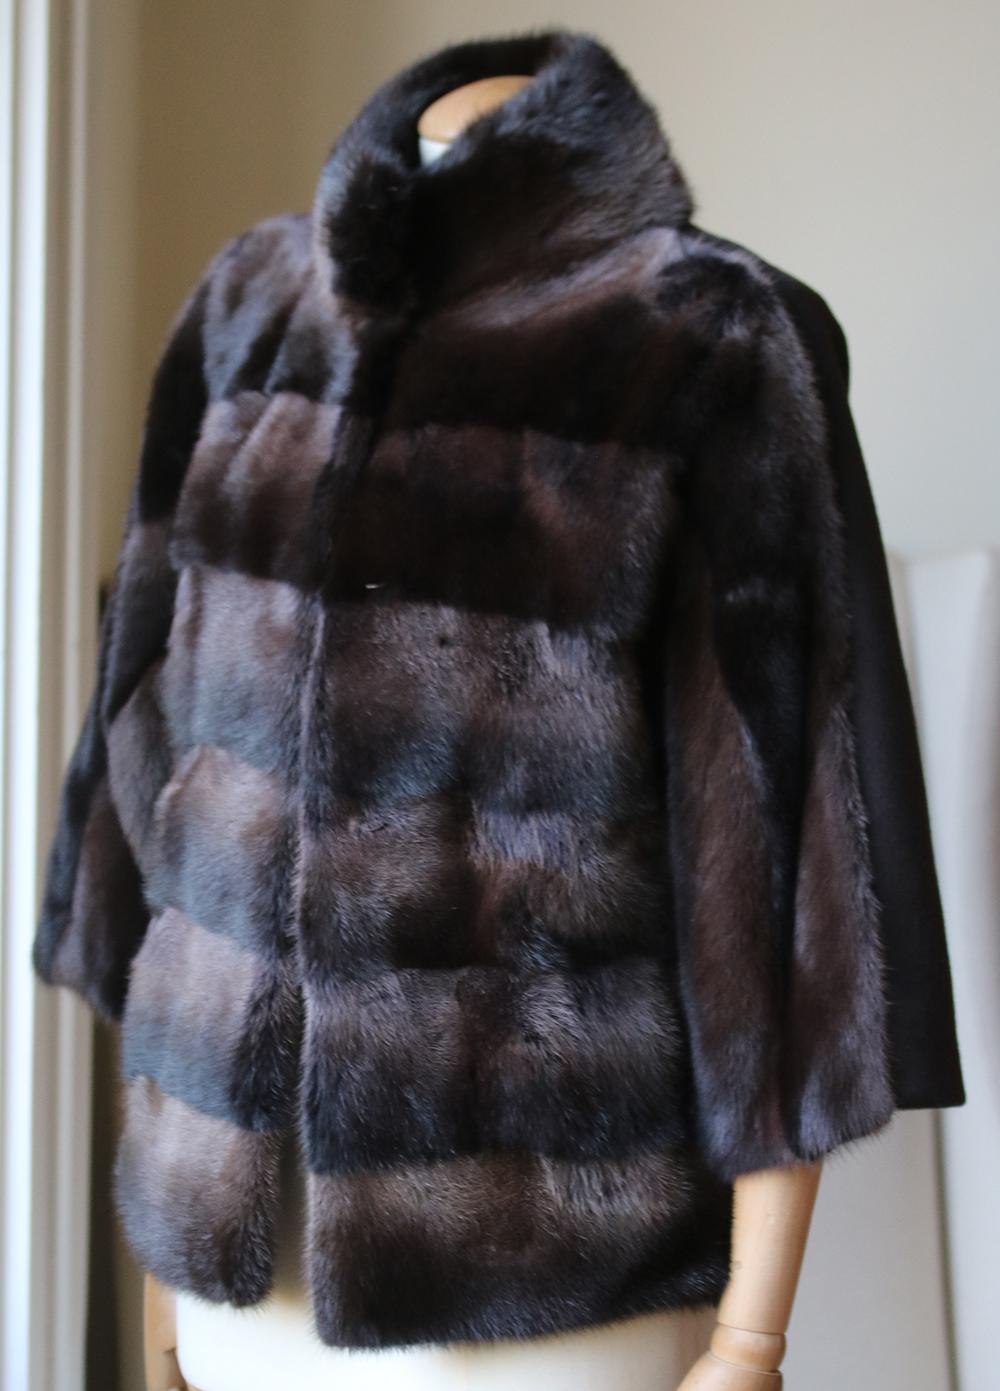 This is a lust-worthy, once-in-a-lifetime coat. Nothing is as gorgeous mink coat in a comtemporary but classic design and colour. Cashmere backing. Fully lined. 100% Mink fur. 

Size: XSmall (UK 6, US 2, FR 34, IT 38)

Condition: As new condition,